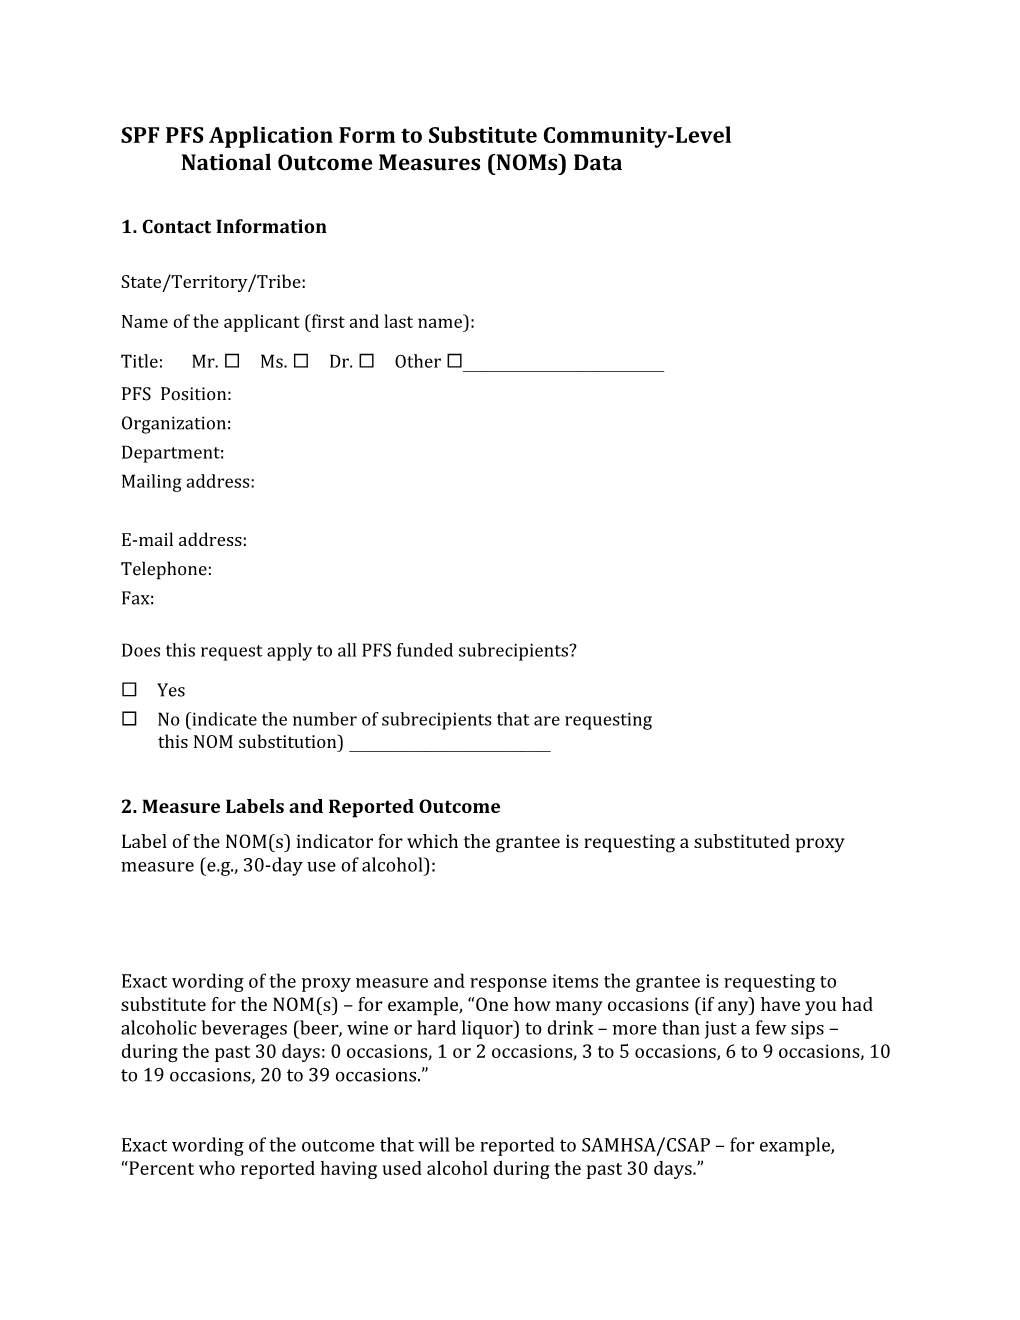 SPF Pfsapplication Form to Substitute Community-Levelnational Outcome Measures (Noms) Data